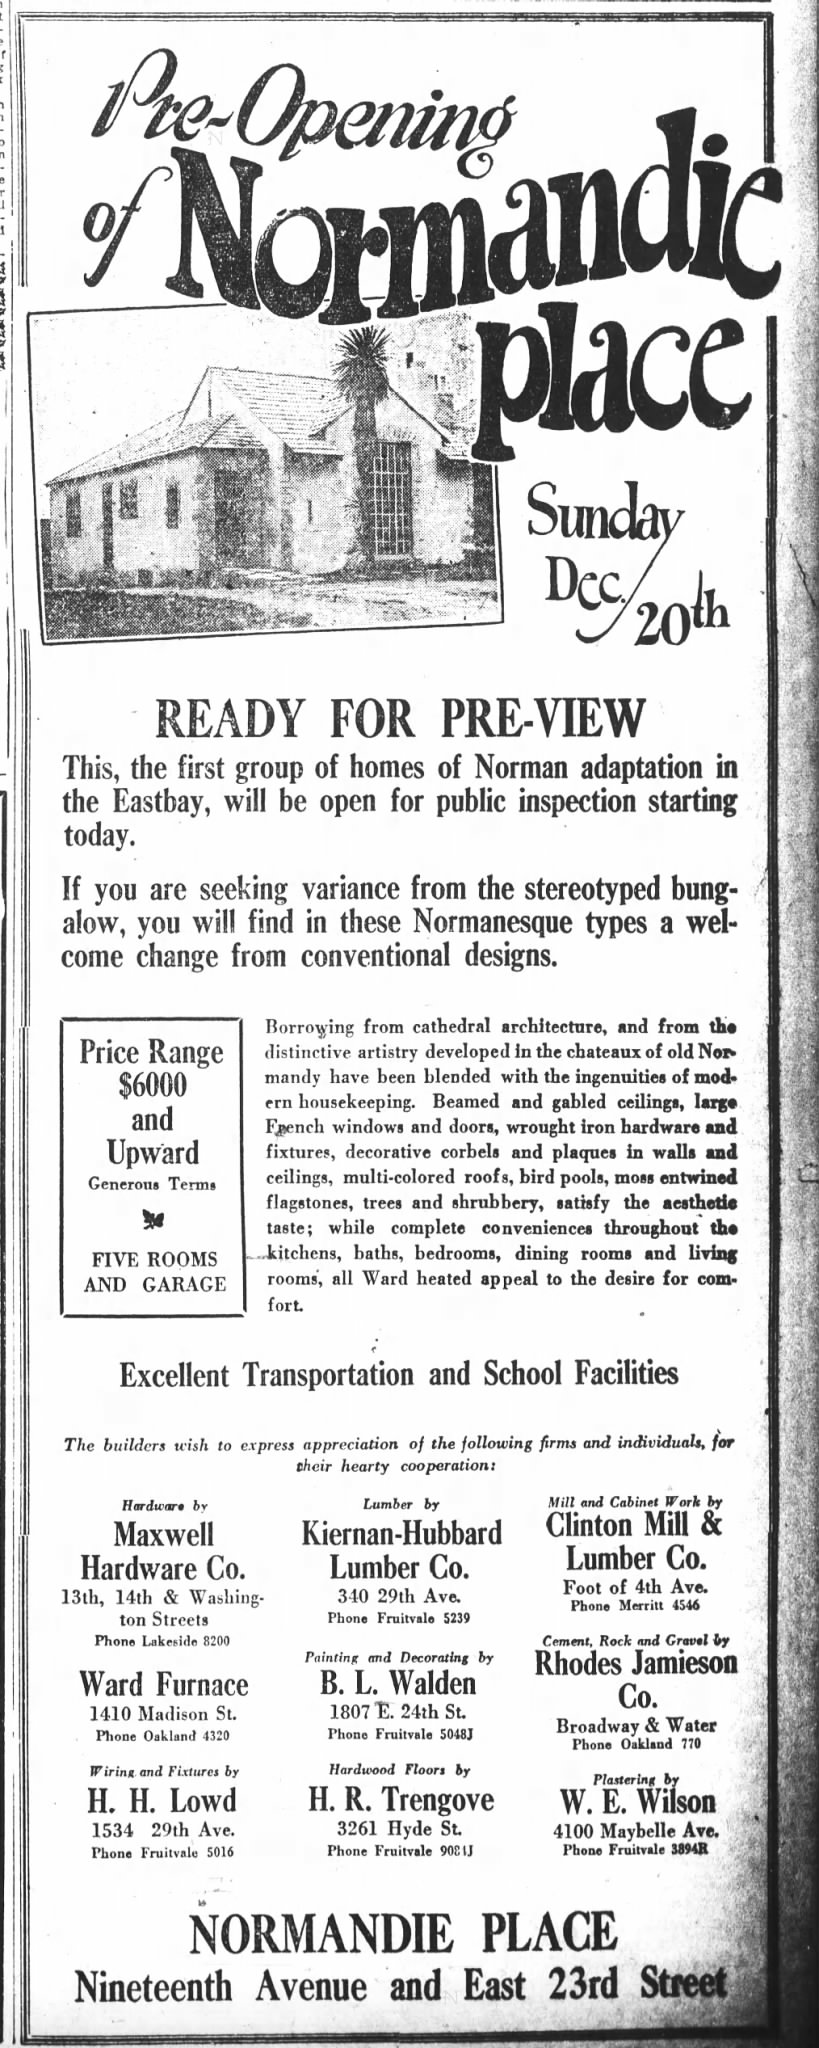 Pre-Opening of Normandie Place - 20 Dec 1925